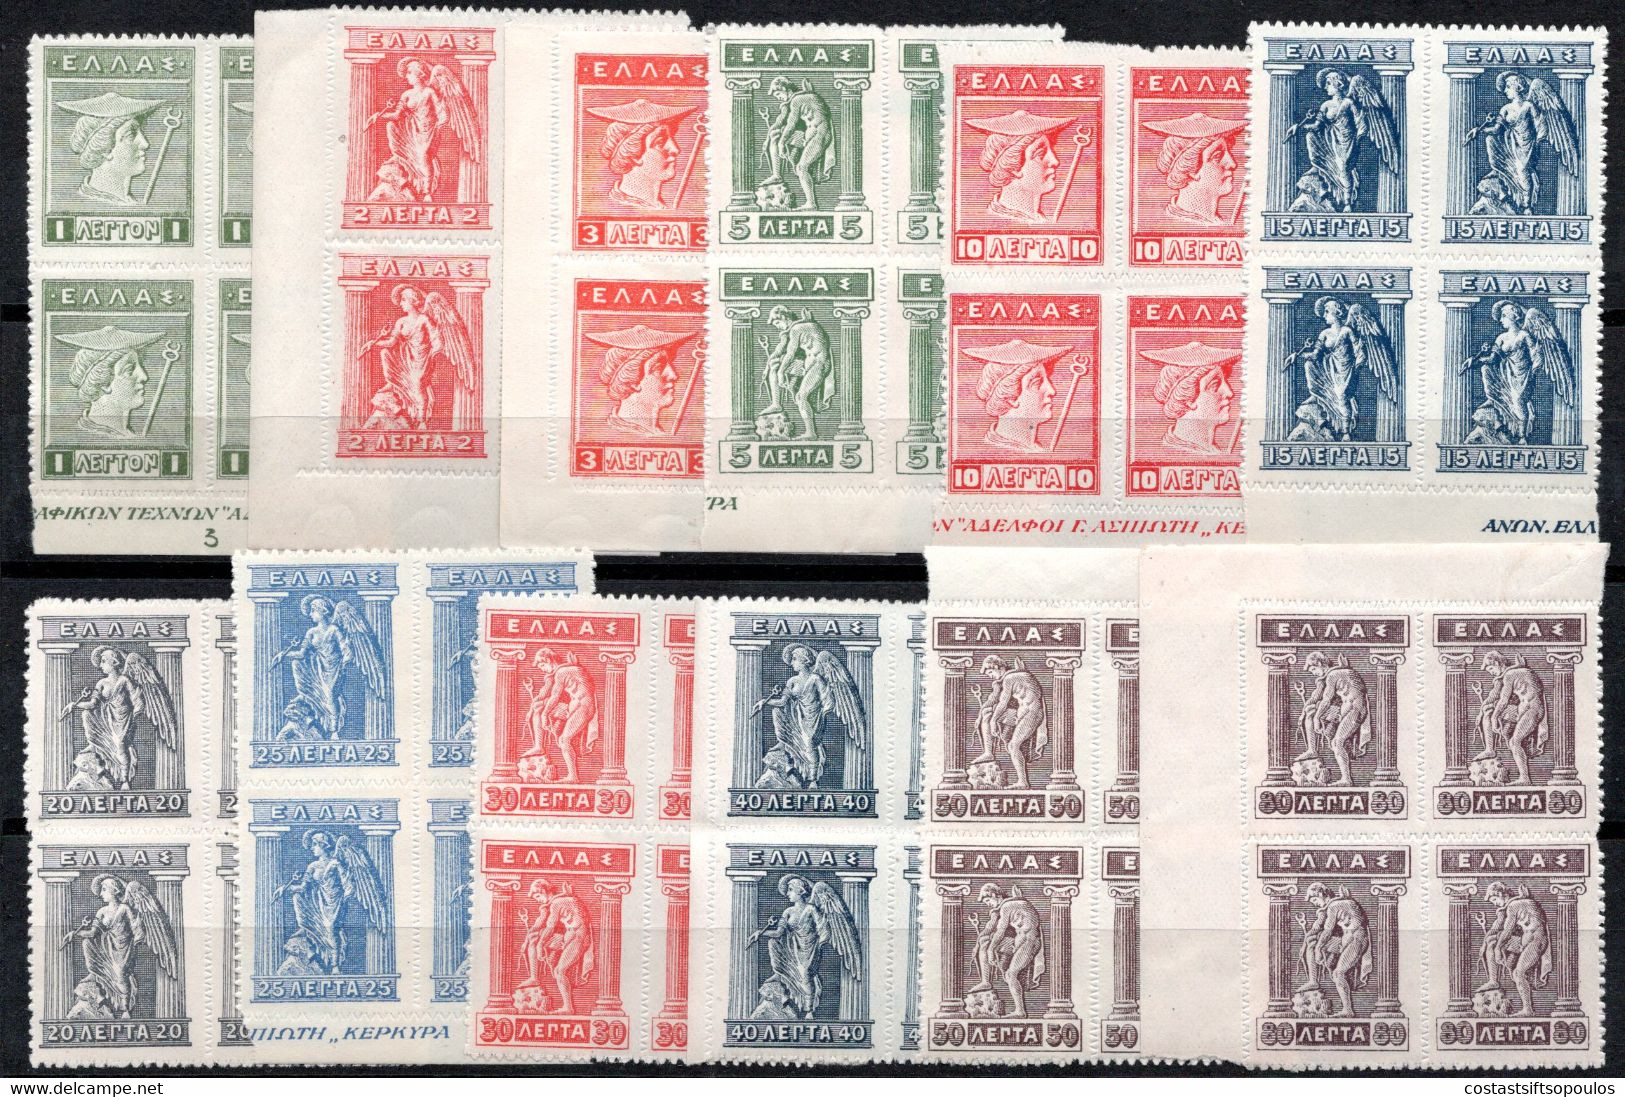 932.GREECE.1912-1923 LITHO Y.T.194A-198L,SC.214-231 MNH BLOCKS OF 4,2-3 VERY LIGHT WRINKLES NOT AFFECTING PAPER.5 SCANS - Hojas Bloque